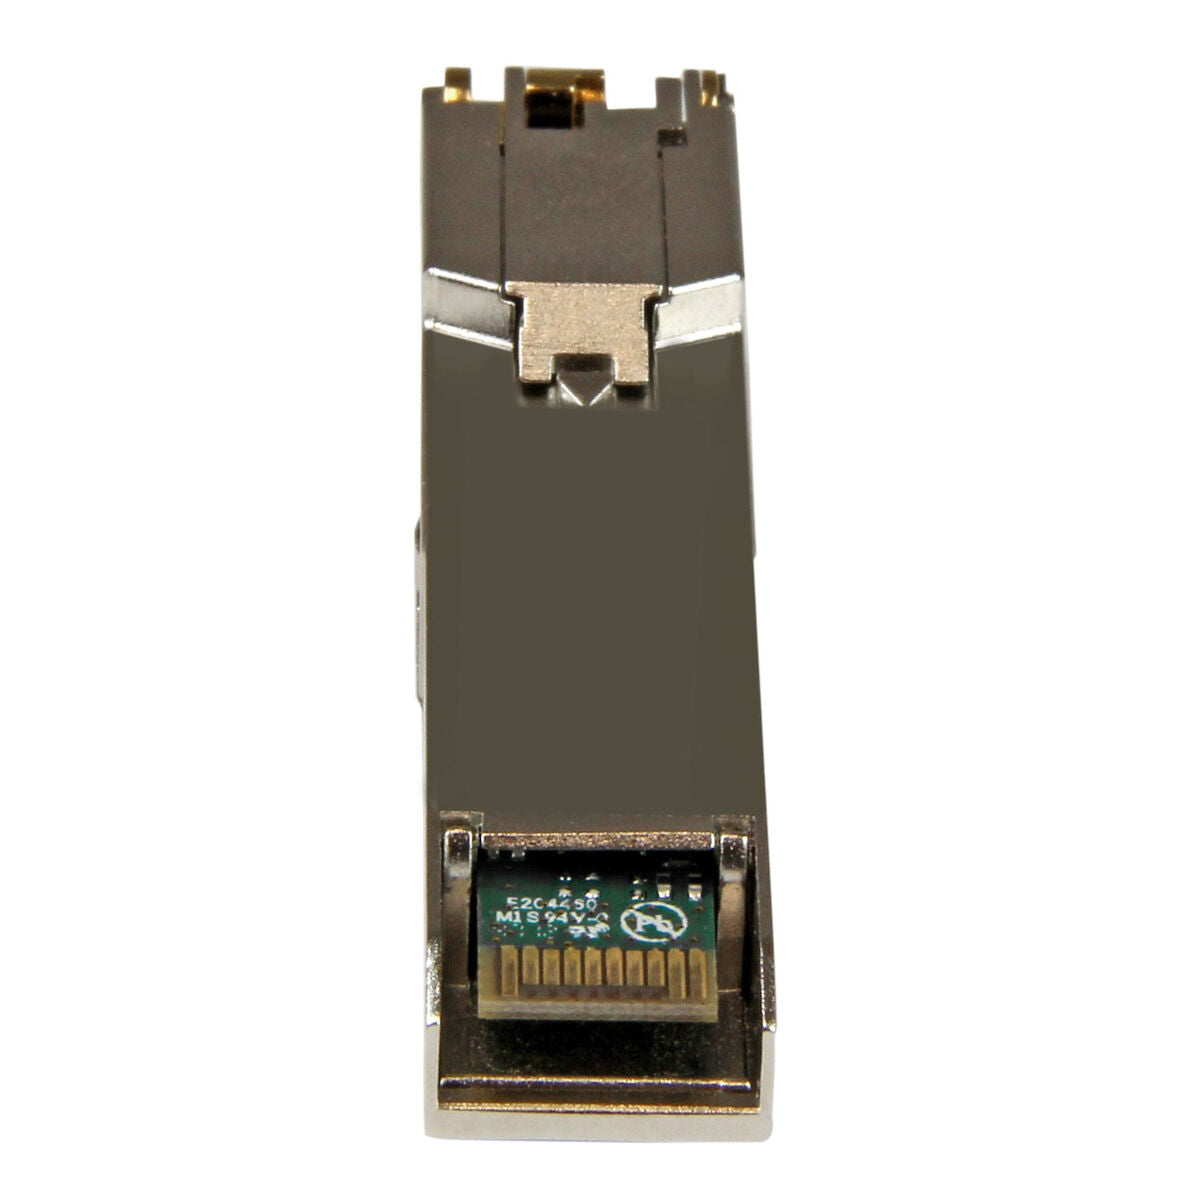 MultiMode SFP Fibre Module Startech 10050-ST, Startech, Computing, Network devices, multimode-sfp-fibre-module-startech-10050-st, Brand_Startech, category-reference-2609, category-reference-2803, category-reference-2821, category-reference-t-19685, category-reference-t-19914, category-reference-t-21374, Condition_NEW, networks/wiring, Price_50 - 100, Teleworking, RiotNook